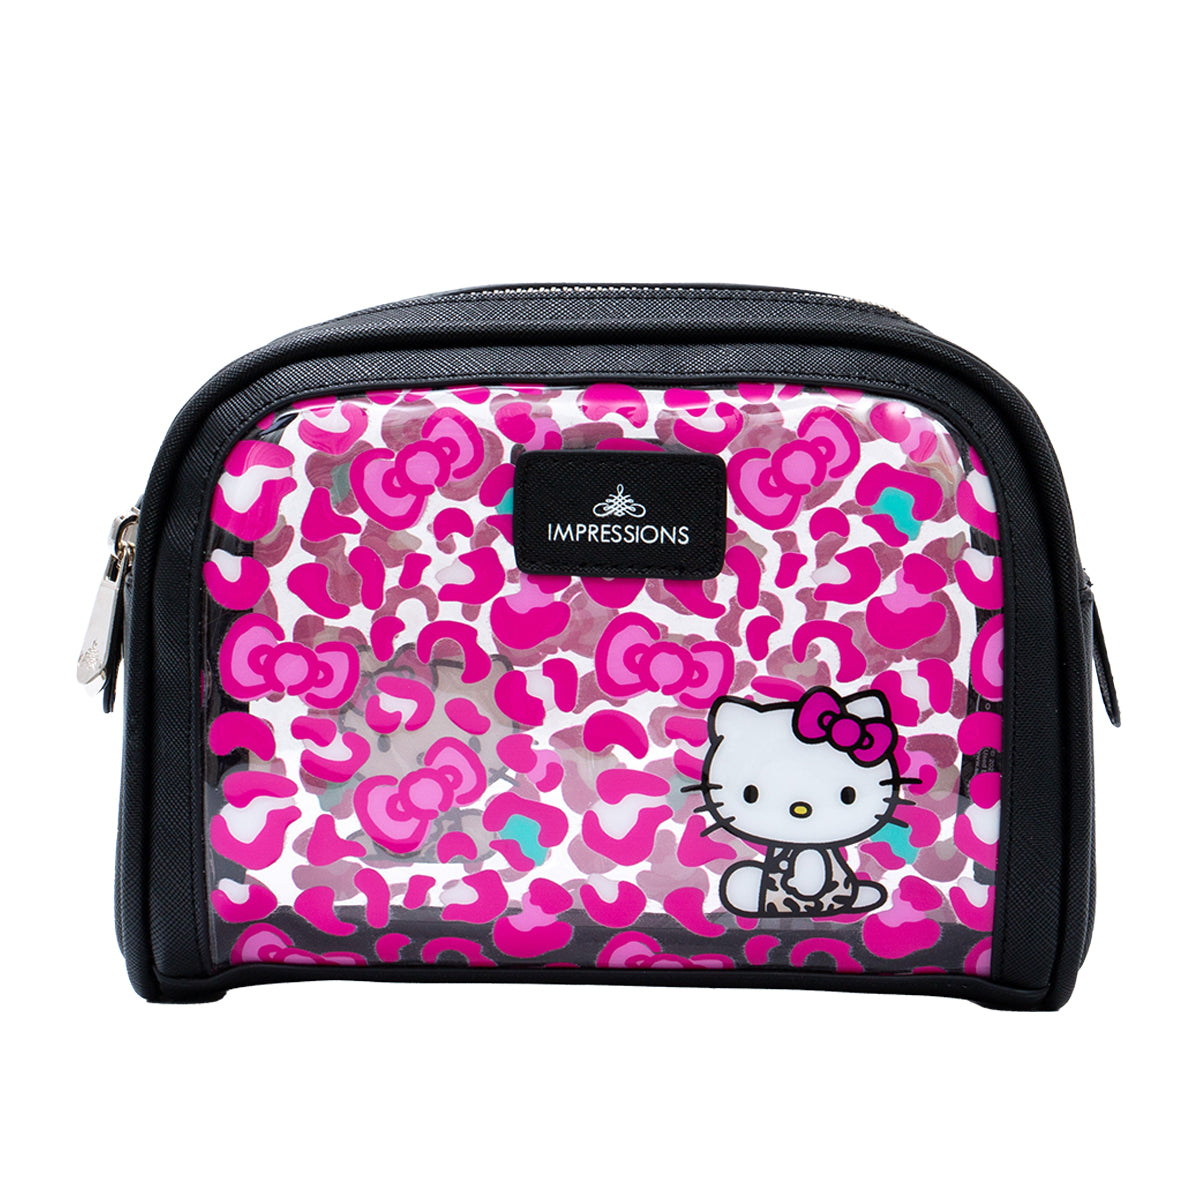 Impressions Vanity Hello Kitty Cosmetic Pouch with Waterproof Faux  Leather,Zippered Bag For Travel Size Toiletries, Makeup Bag Organizer With  Inside